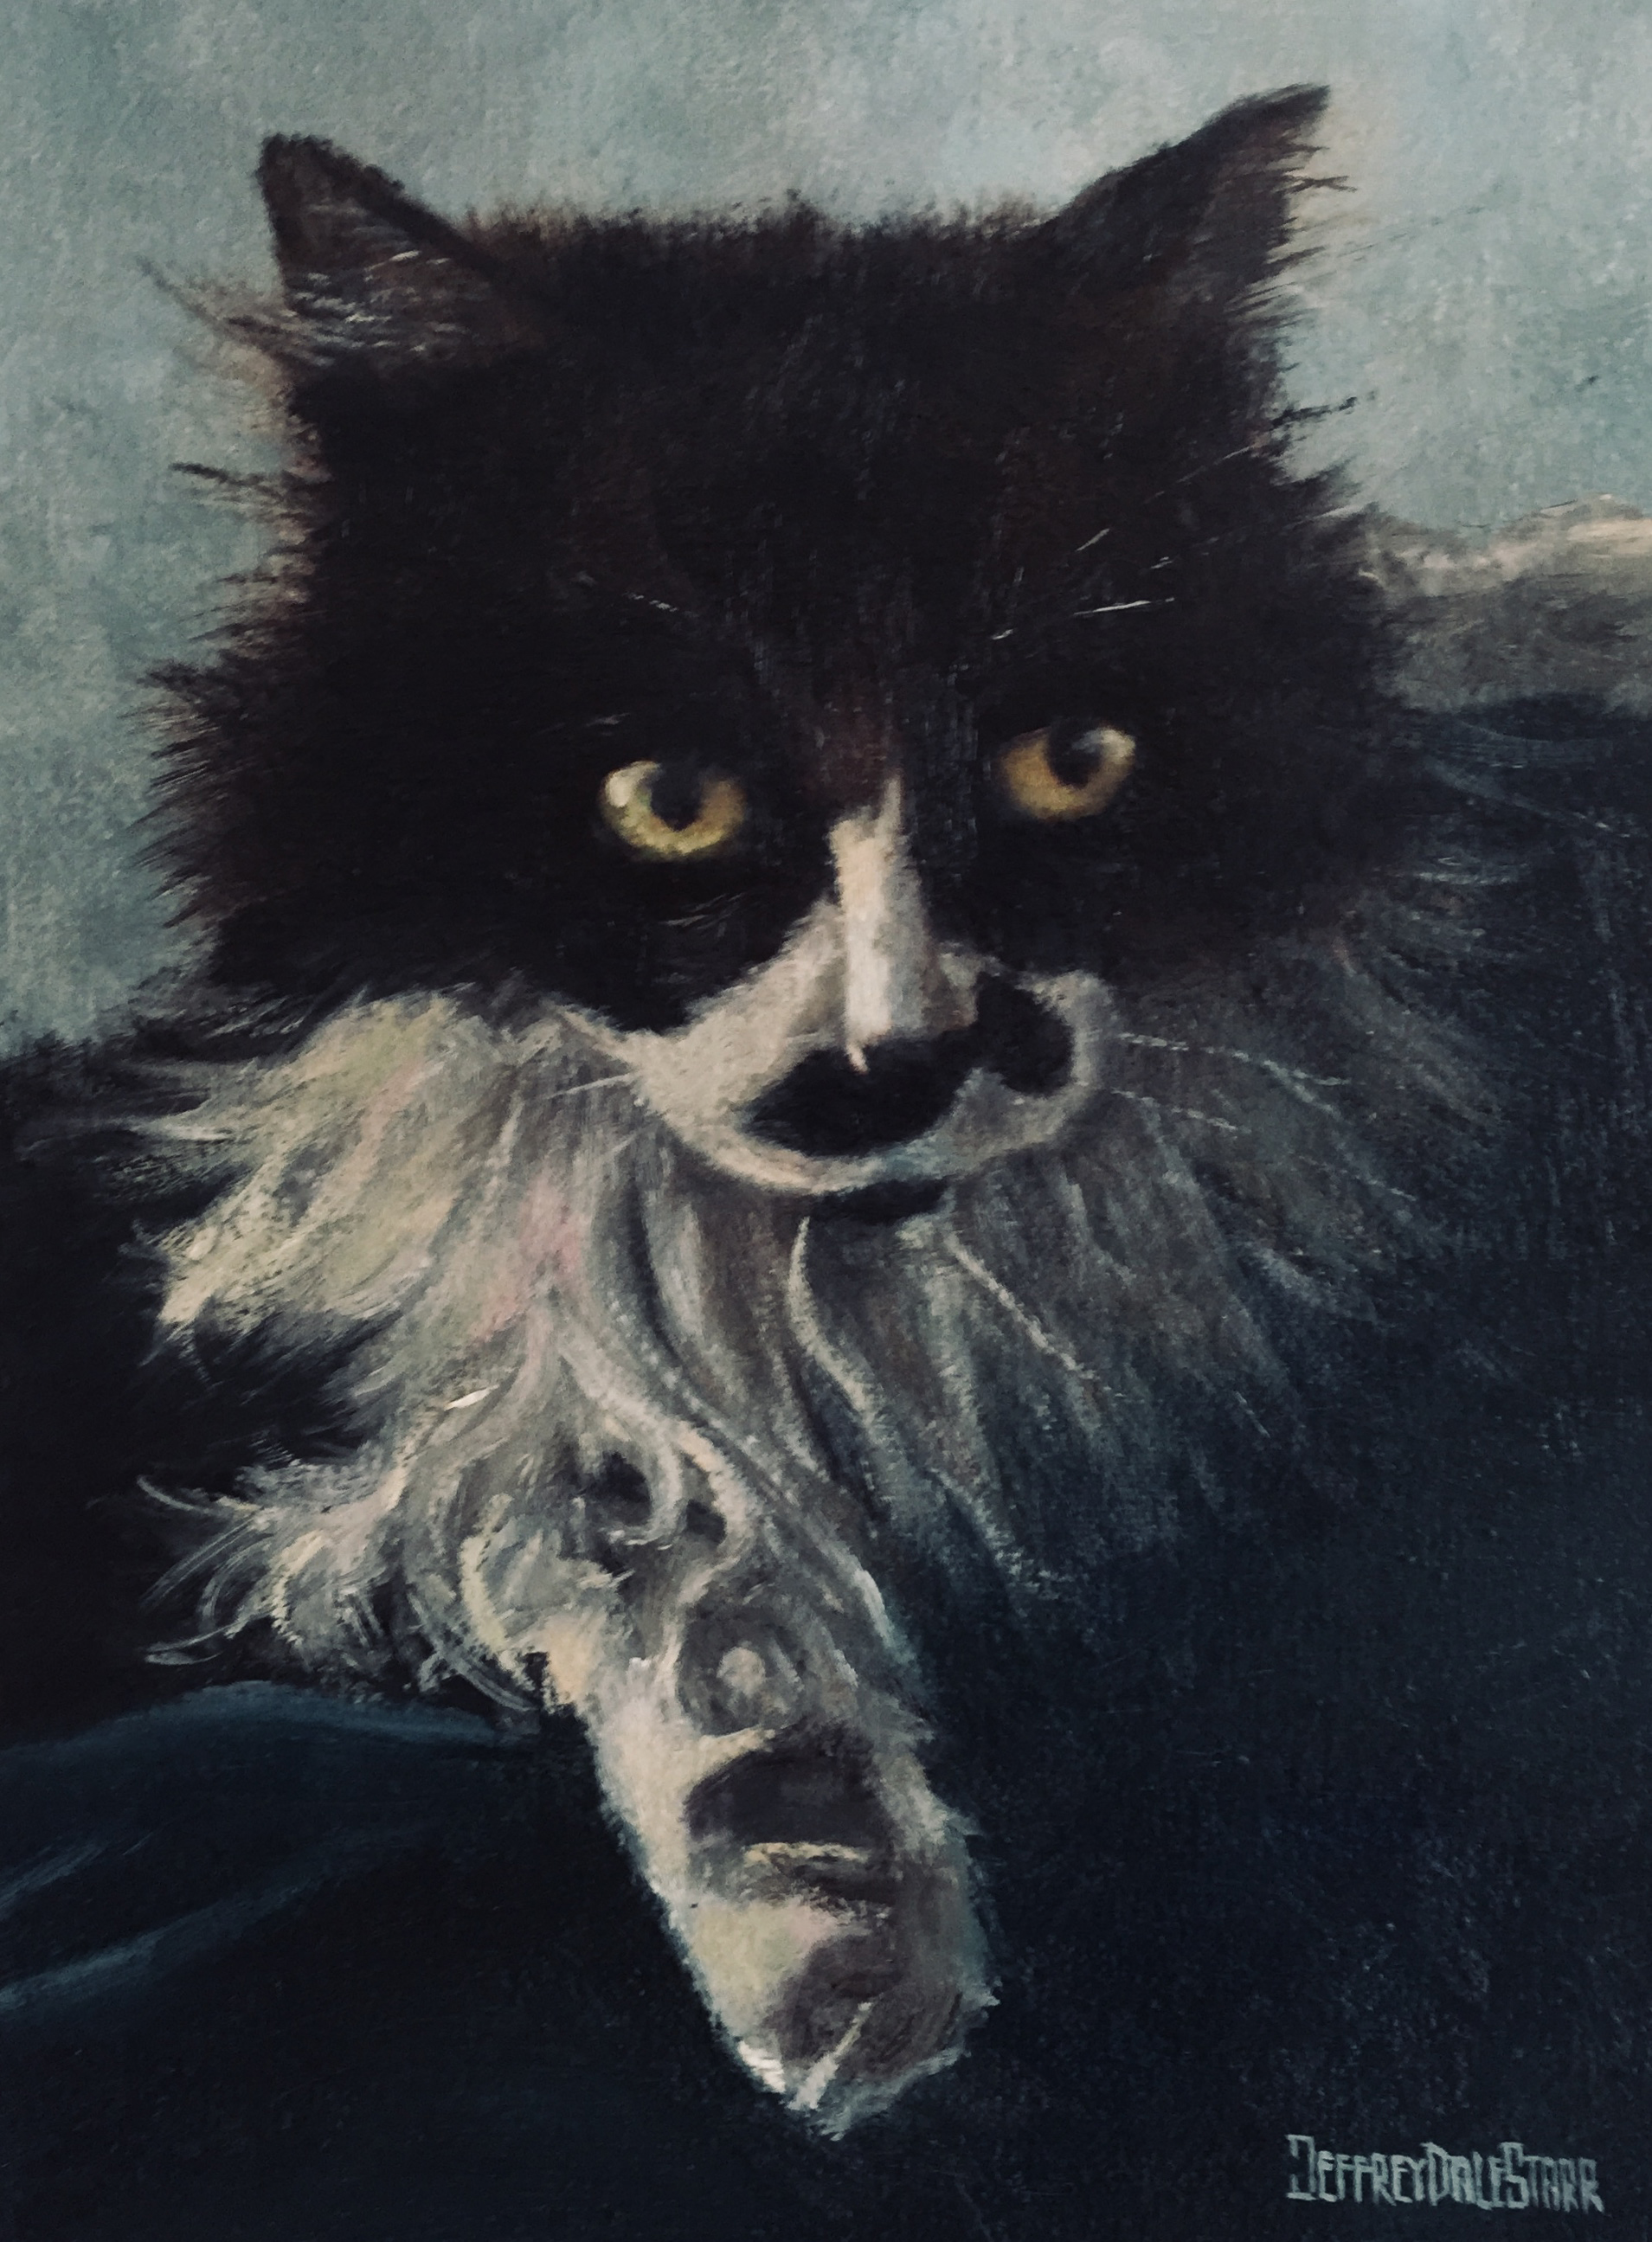 Oil painting "The Kitty with the Fish Mustache" by Jeffrey Dale Starr